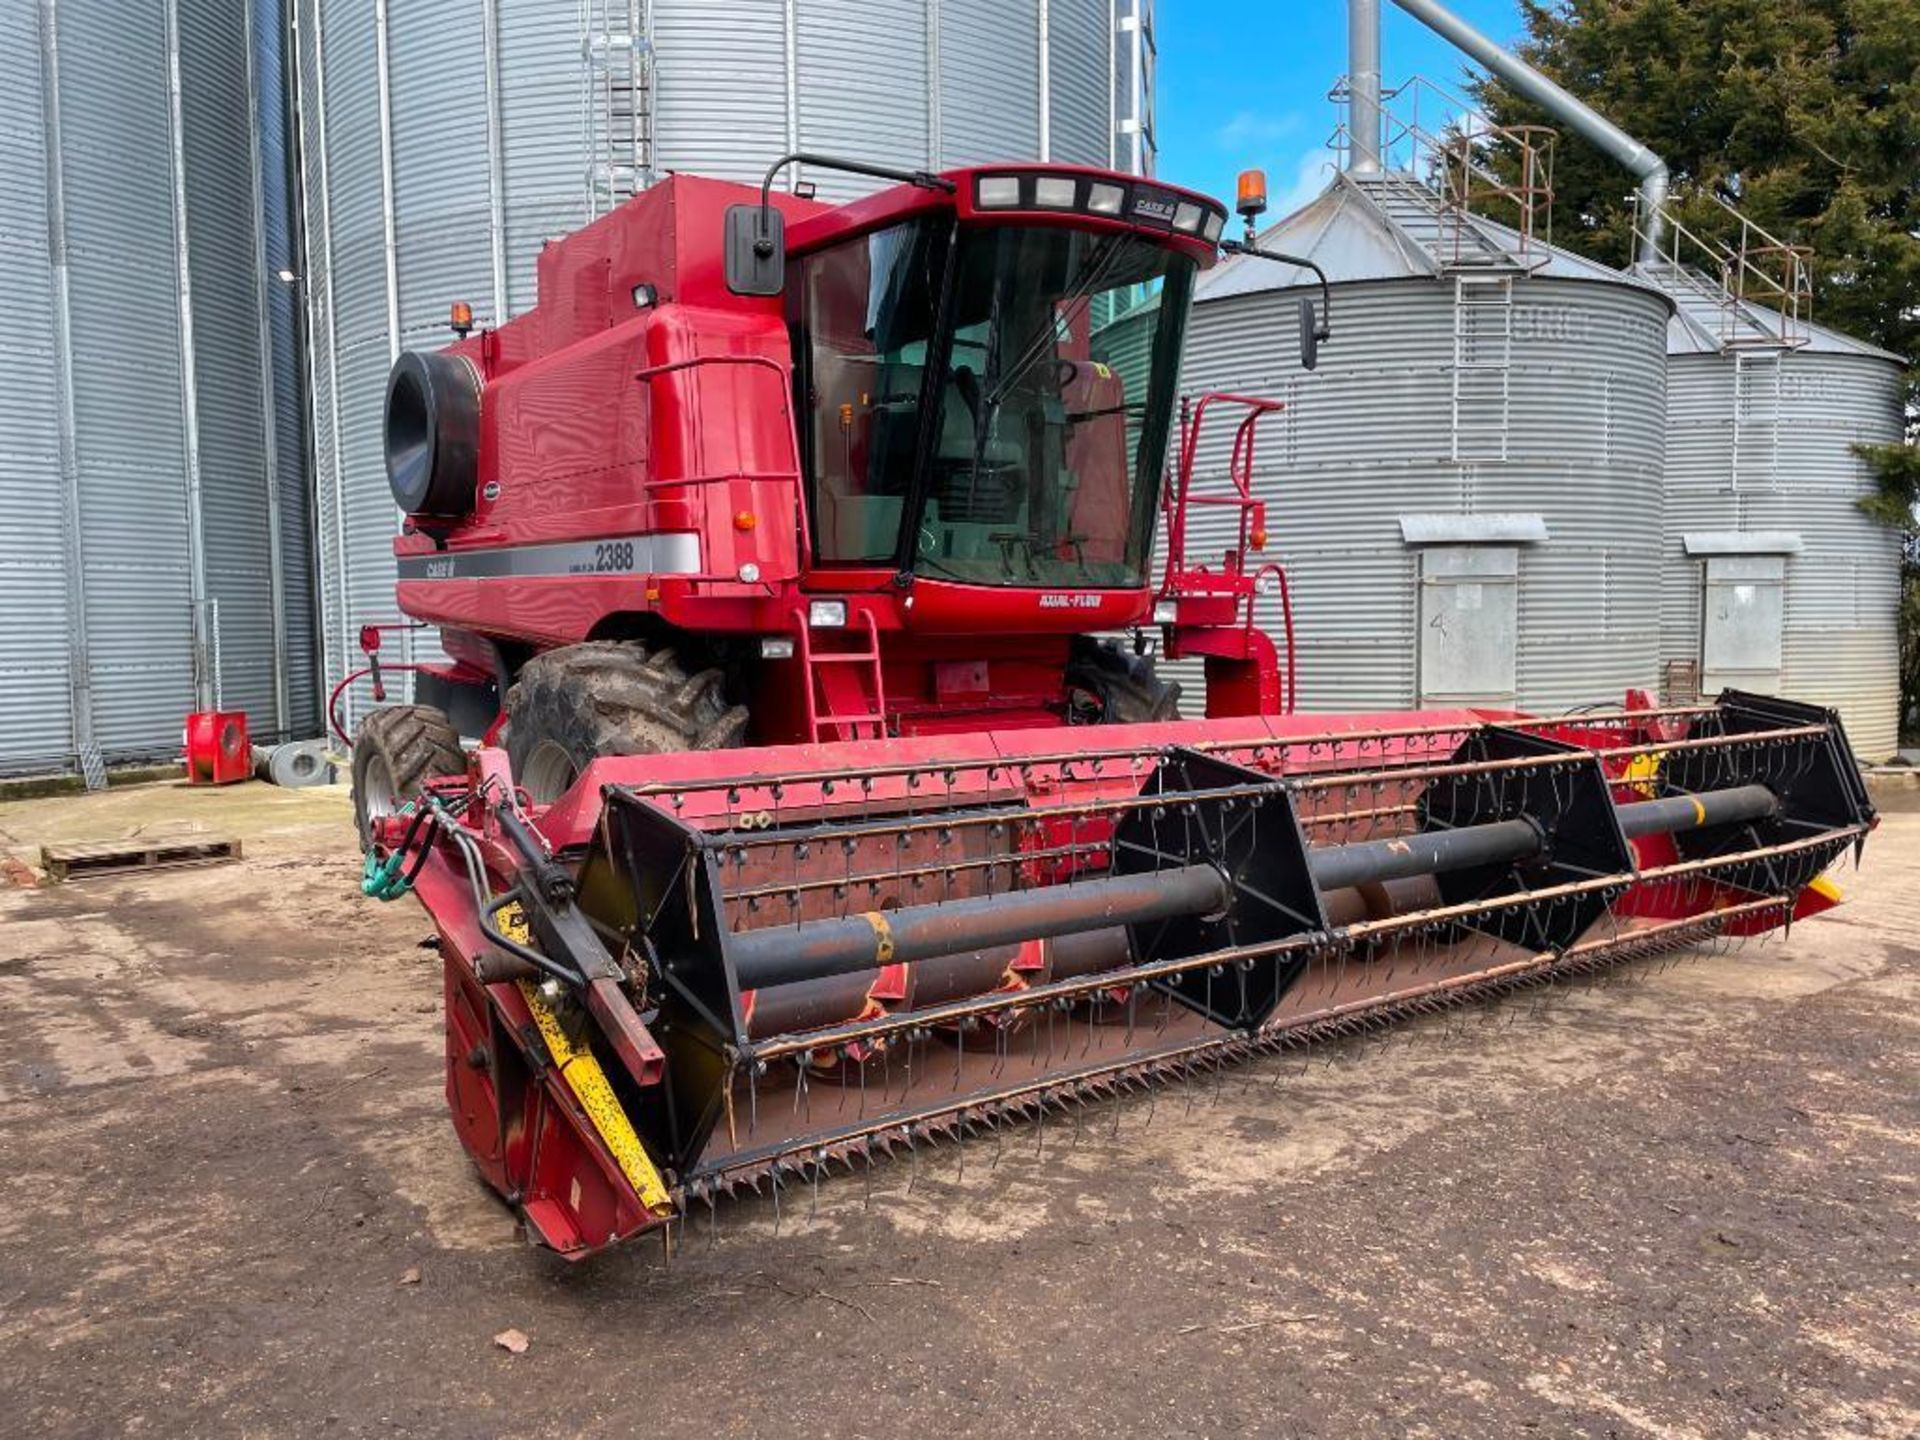 2006 Case Axial Flow 2388 Xclusive combine harvester on 800/65R32 front wheels and tyres with straw - Image 2 of 28